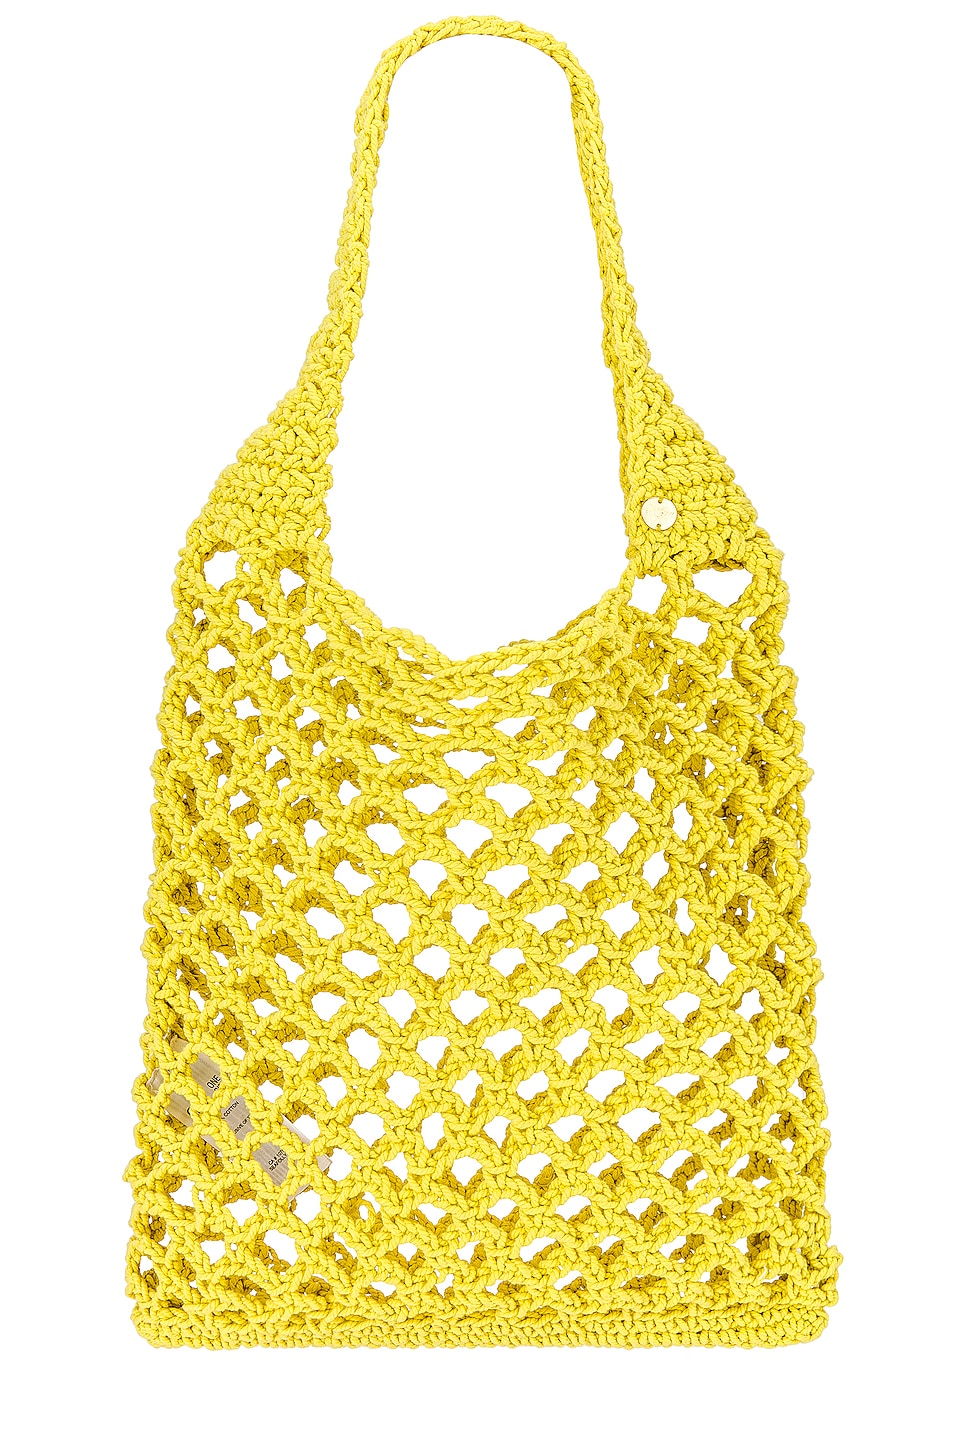 Seafolly Plaited Rope Tote in Celery